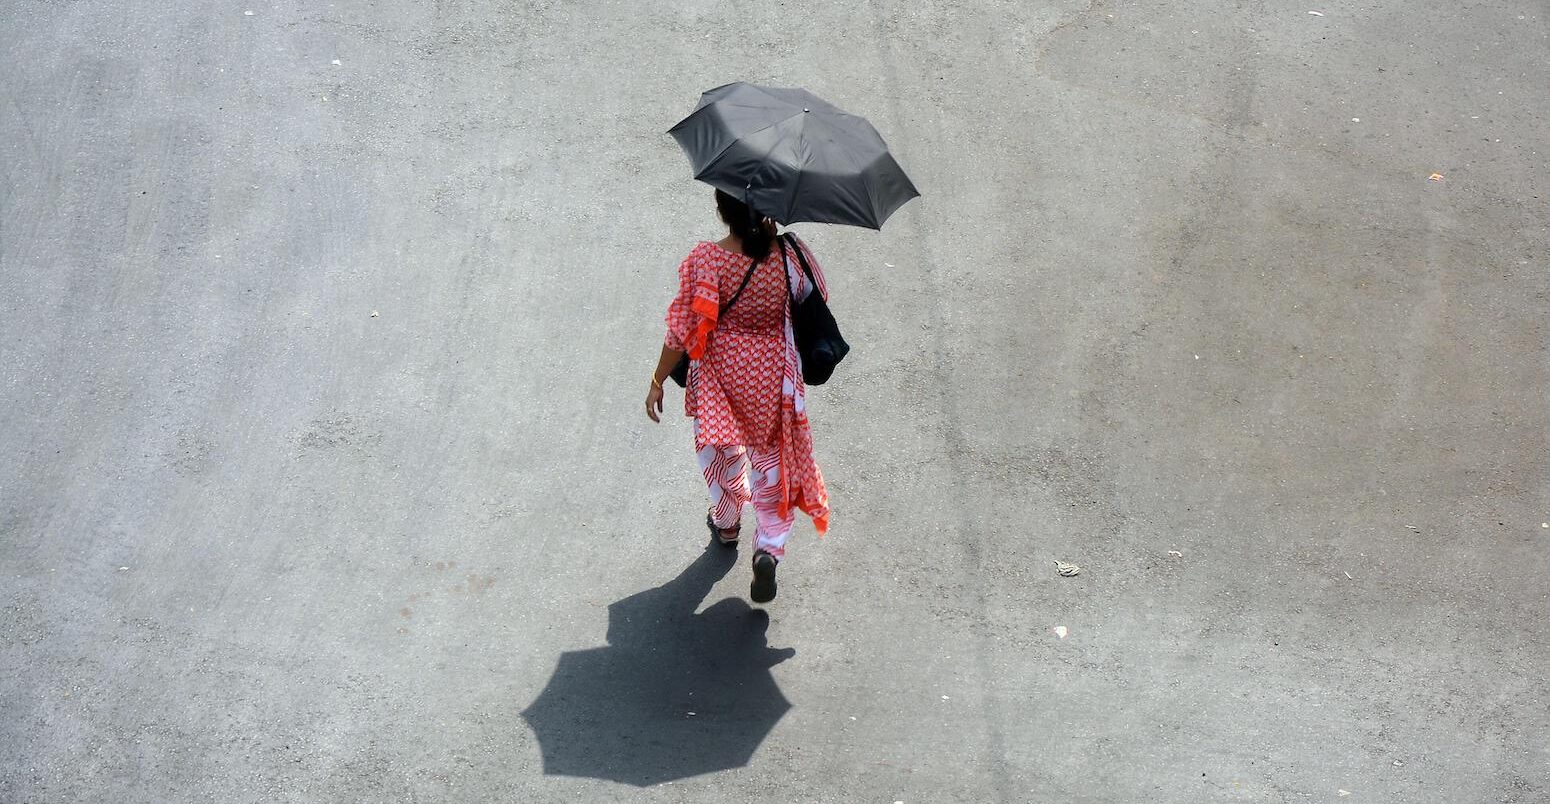 A woman comes outside holding an umbrella in a hot summer day in Kolkata, India on April 26, 2022.